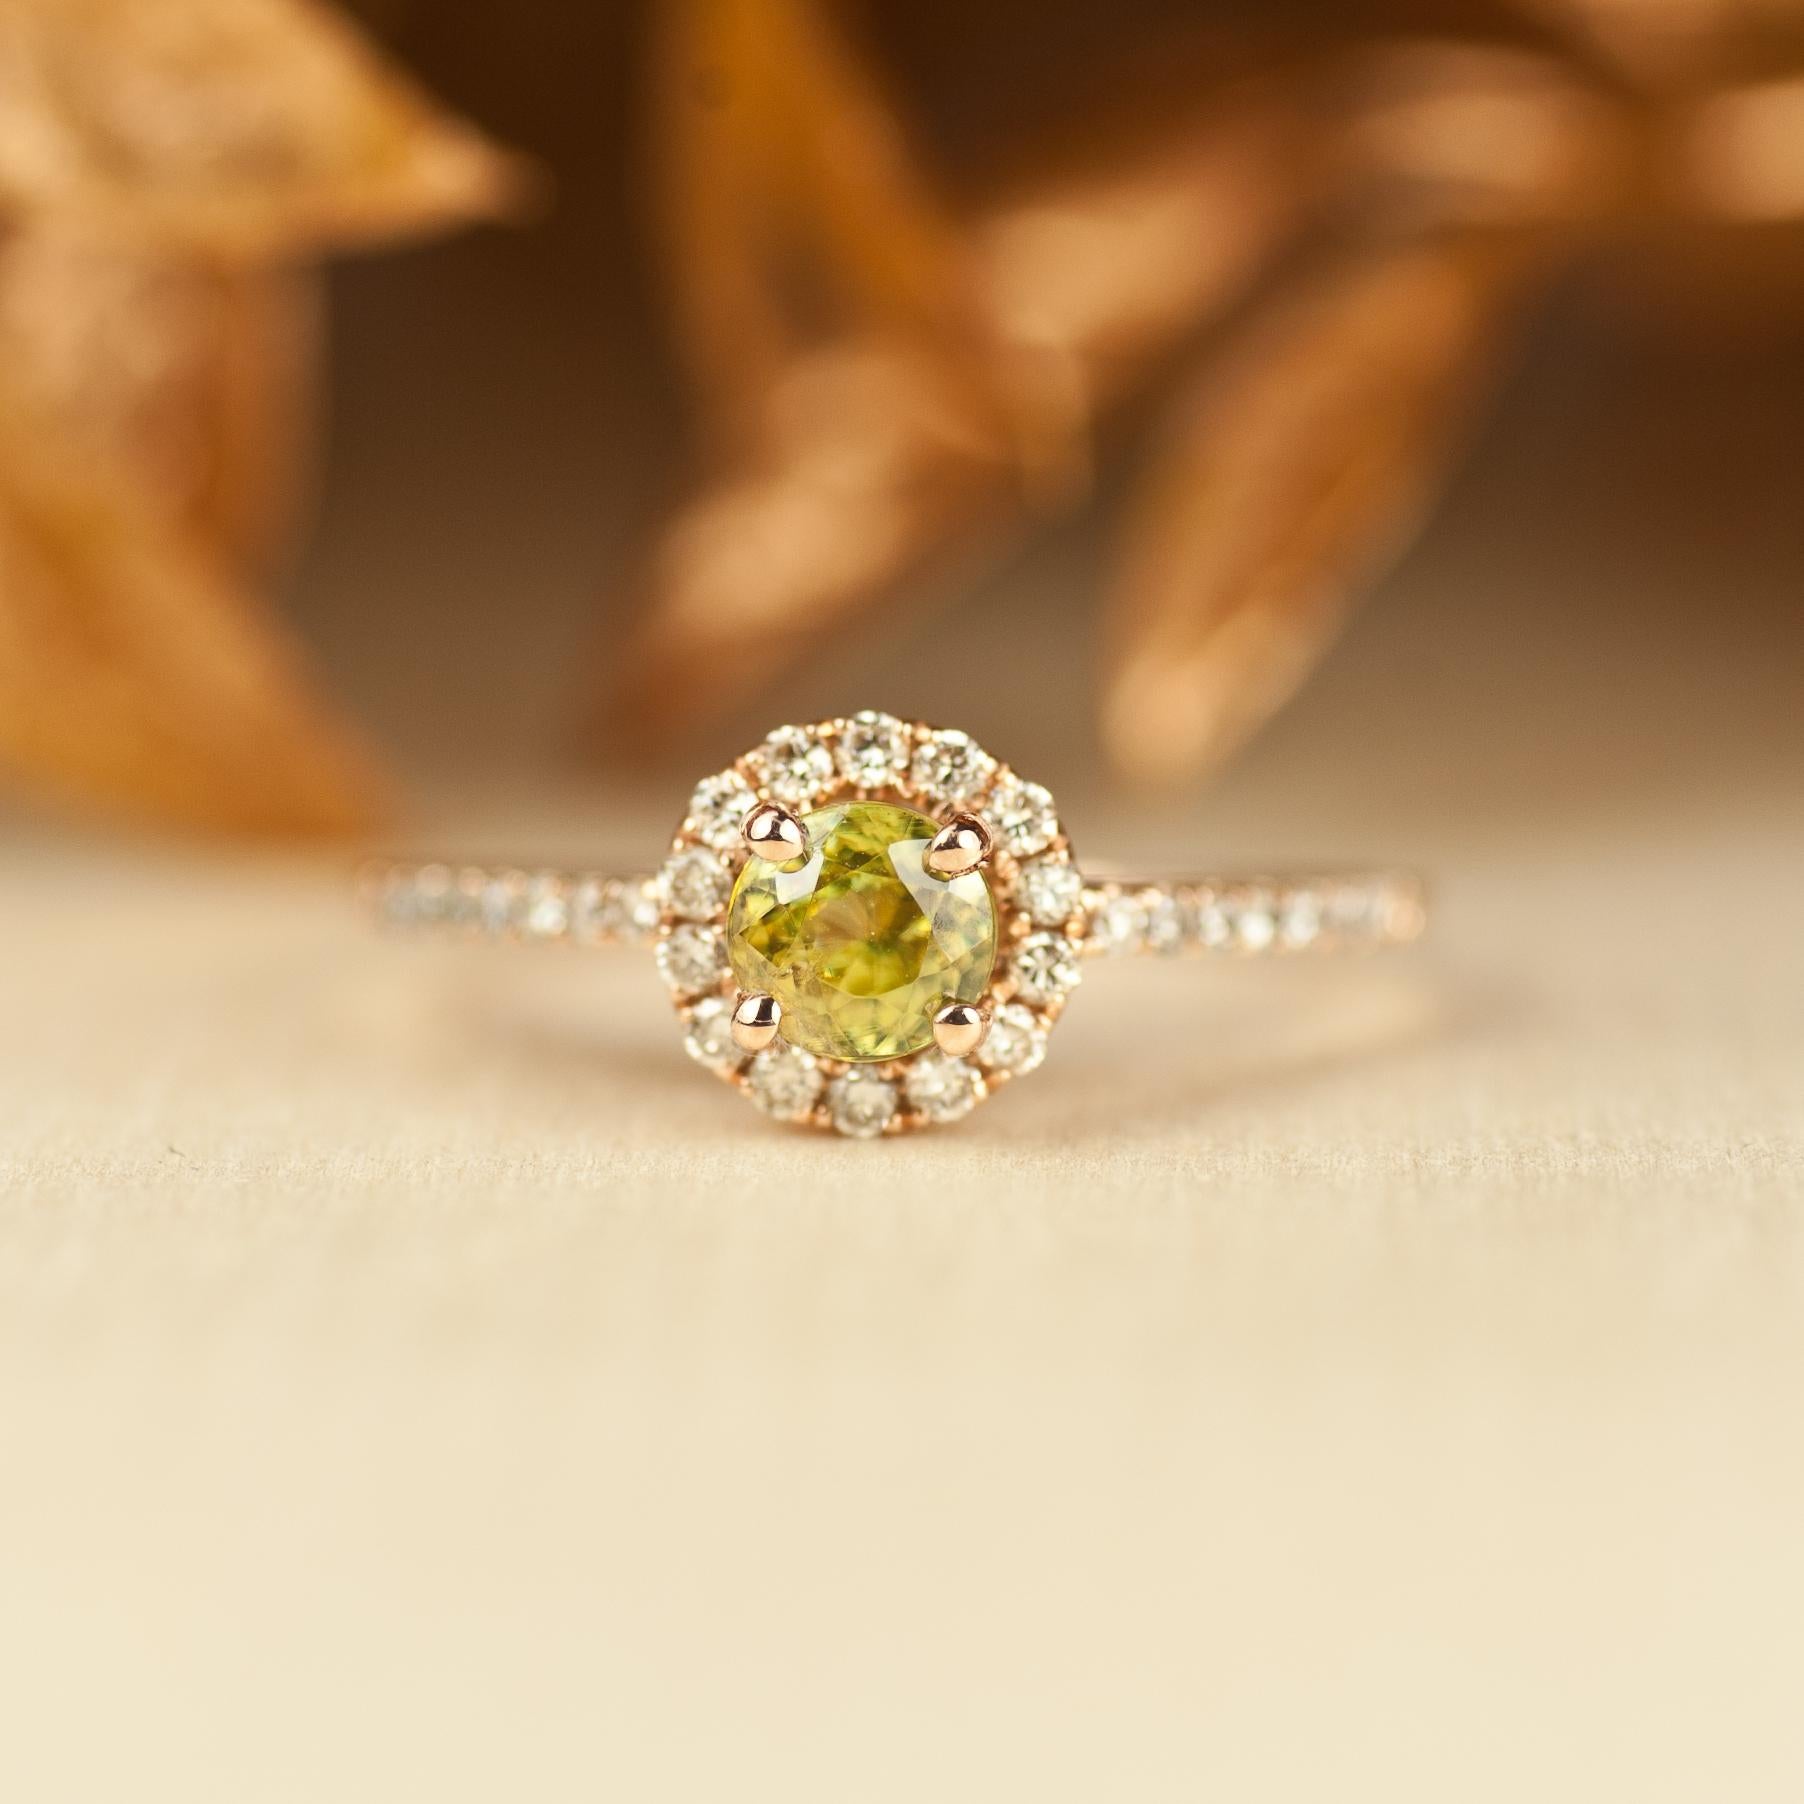 As an alternative to a yellow diamond ring, this sphene gemstone makes an extra sparkling substitute for a fraction of the price.

One of the most unique qualities of the sphene gemstone is that it has fire (flashes of rainbow colors) like